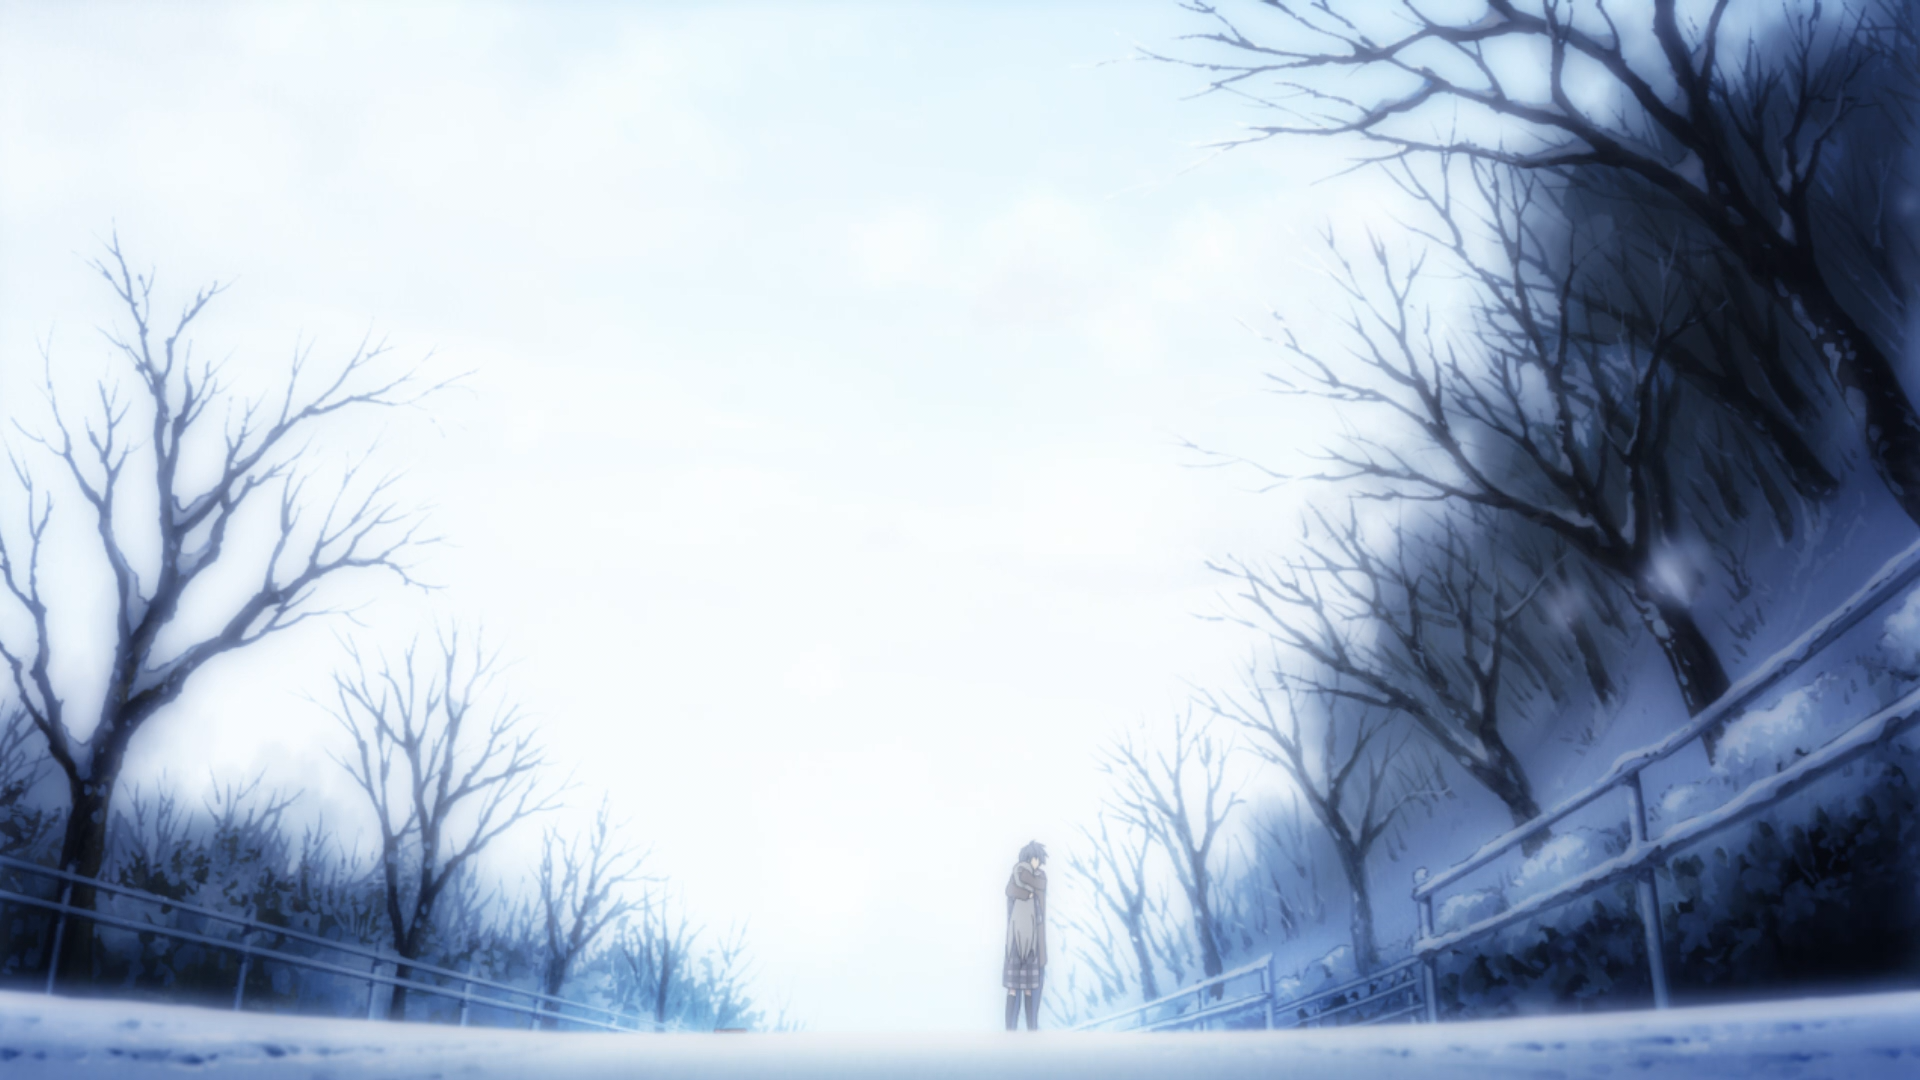 Anime 1920x1080 anime winter Clannad cold trees ice snow alone outdoors